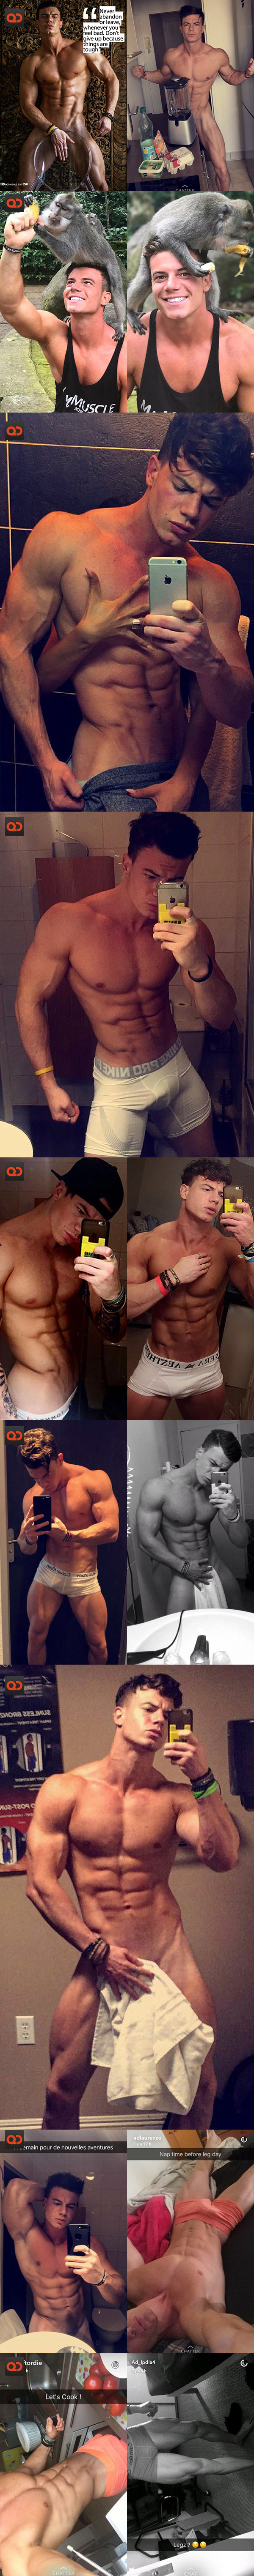 Adrien Laurent, French Fitness Model And IG Star From TV Show Friends Trip, Cock Exposed In Leaked Sex Tape!